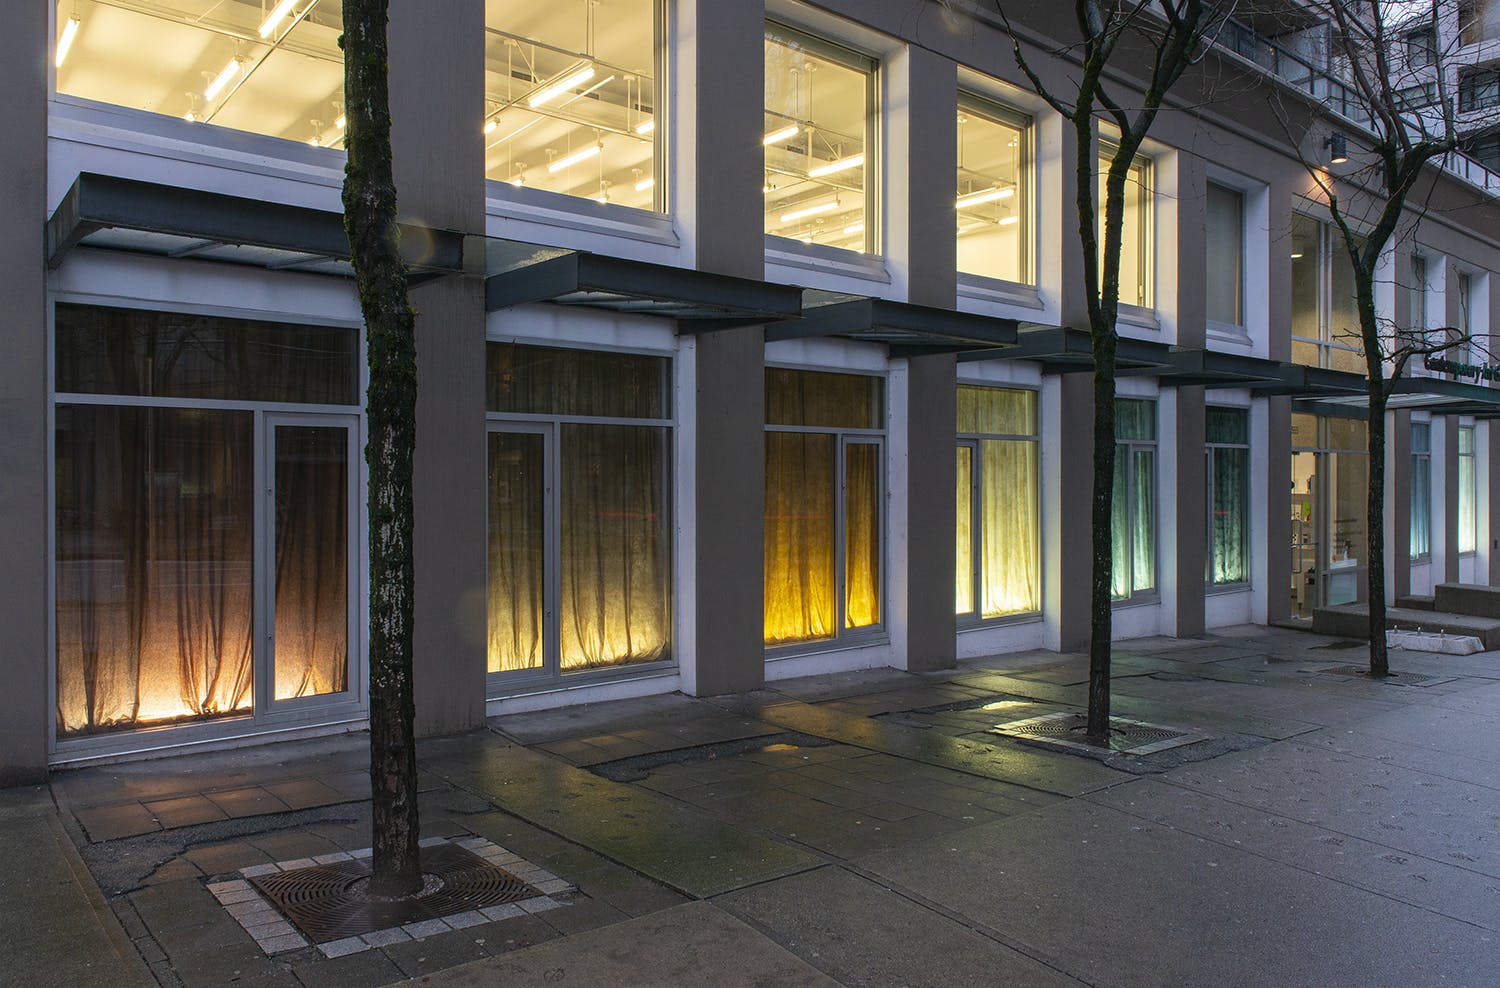 Exterior image of the Contemporary Art Gallery displaying the work of Nicole Kelly Westman in the windows. The eight windows on the first floor are lit, highlighting various coloured backdrops. 